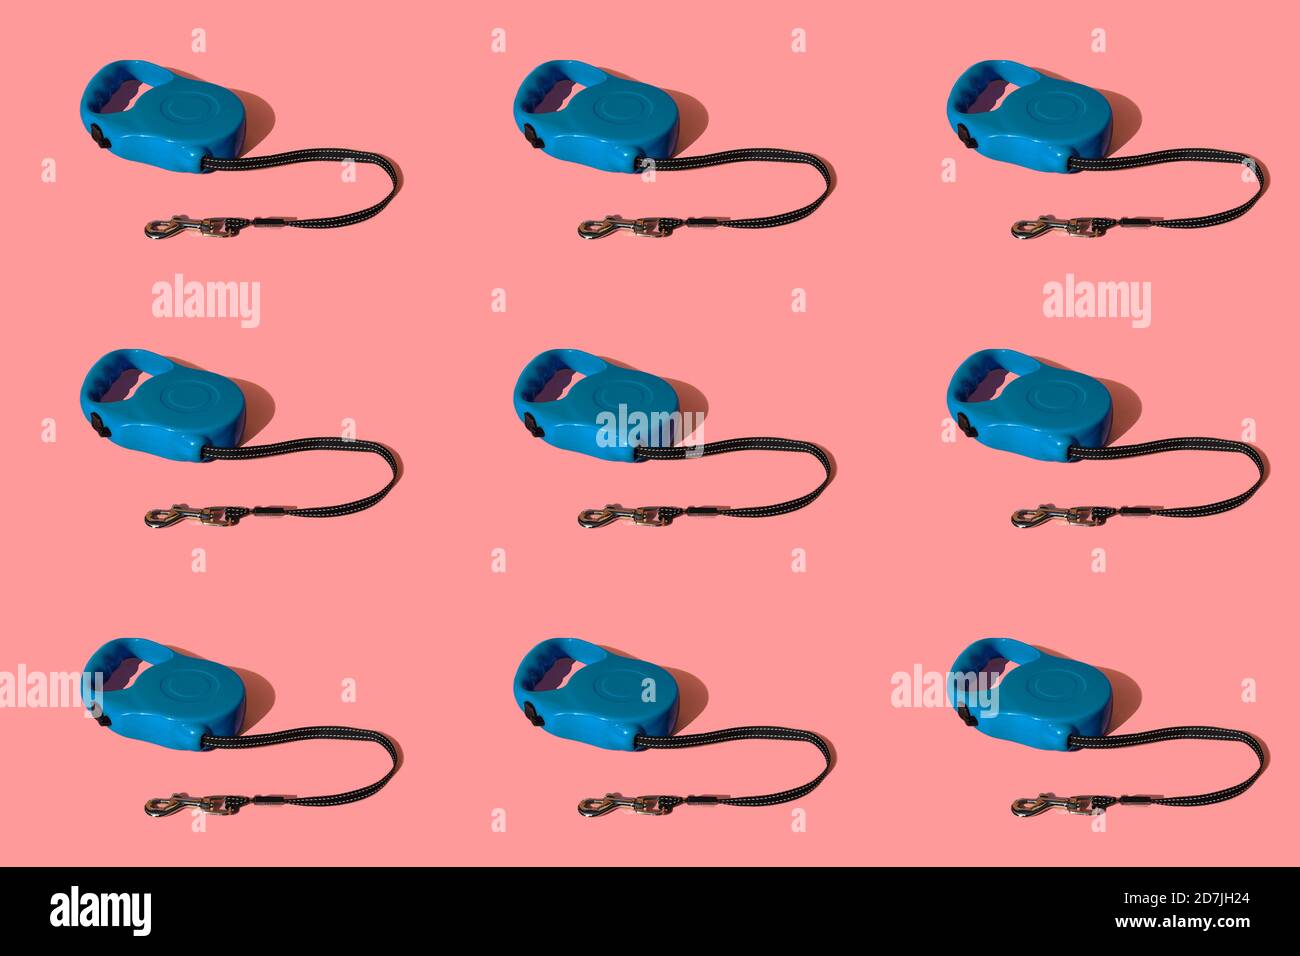 Retractable pet leashes on colored background Stock Photo